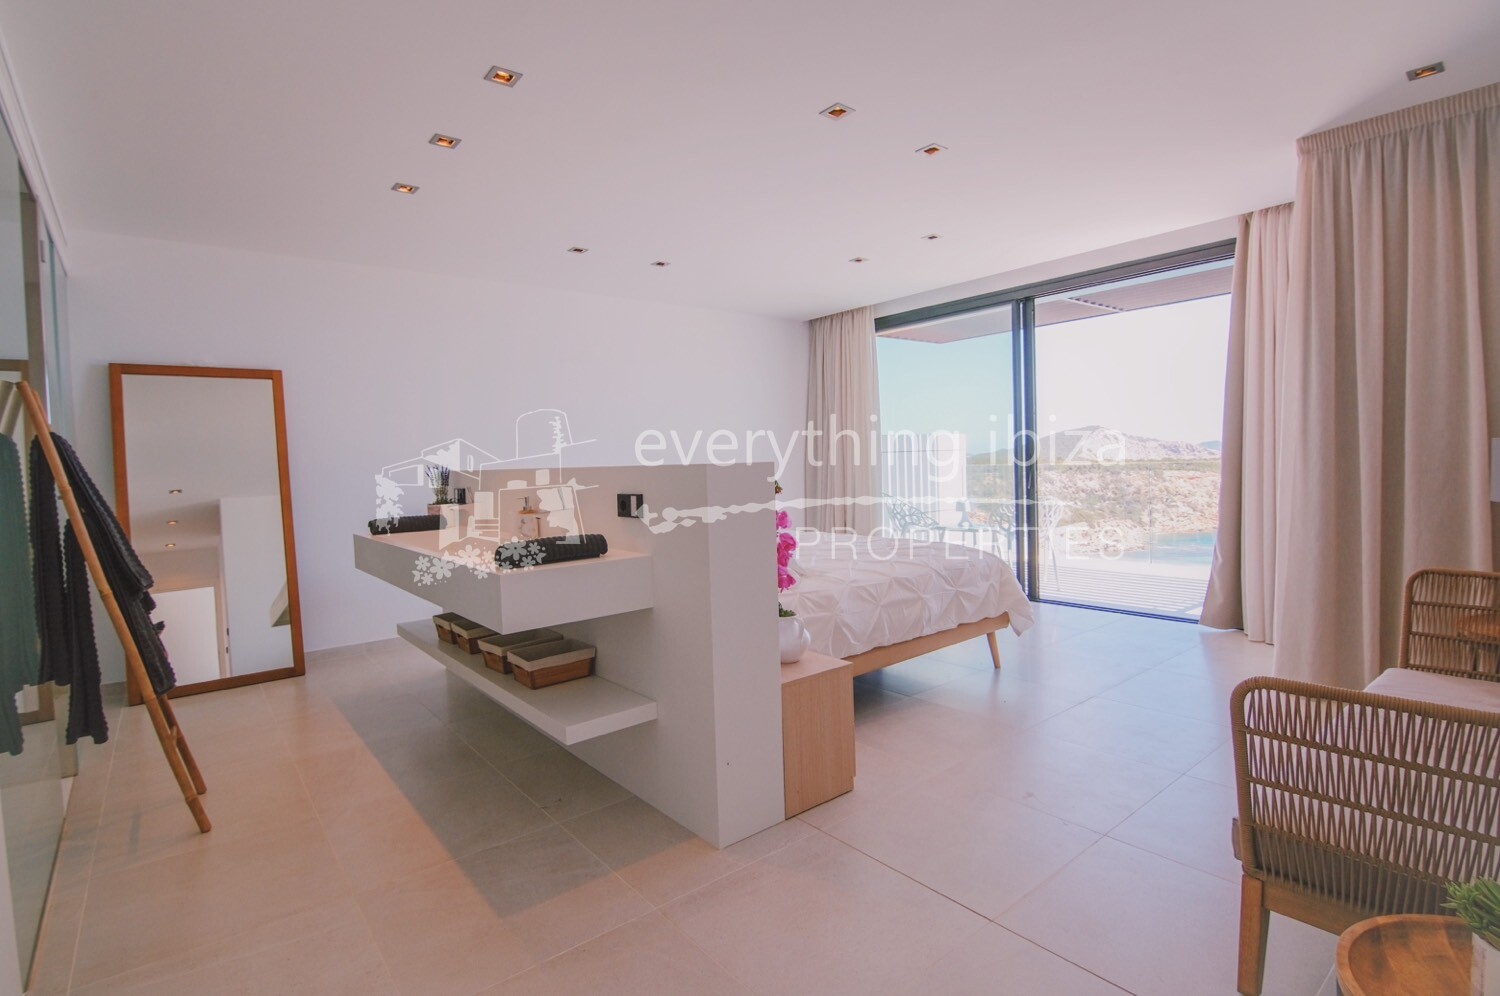 Beautiful Modern Villa Overlooking the Sea, ref. 1366, for sale in Ibiza by everything ibiza Properties